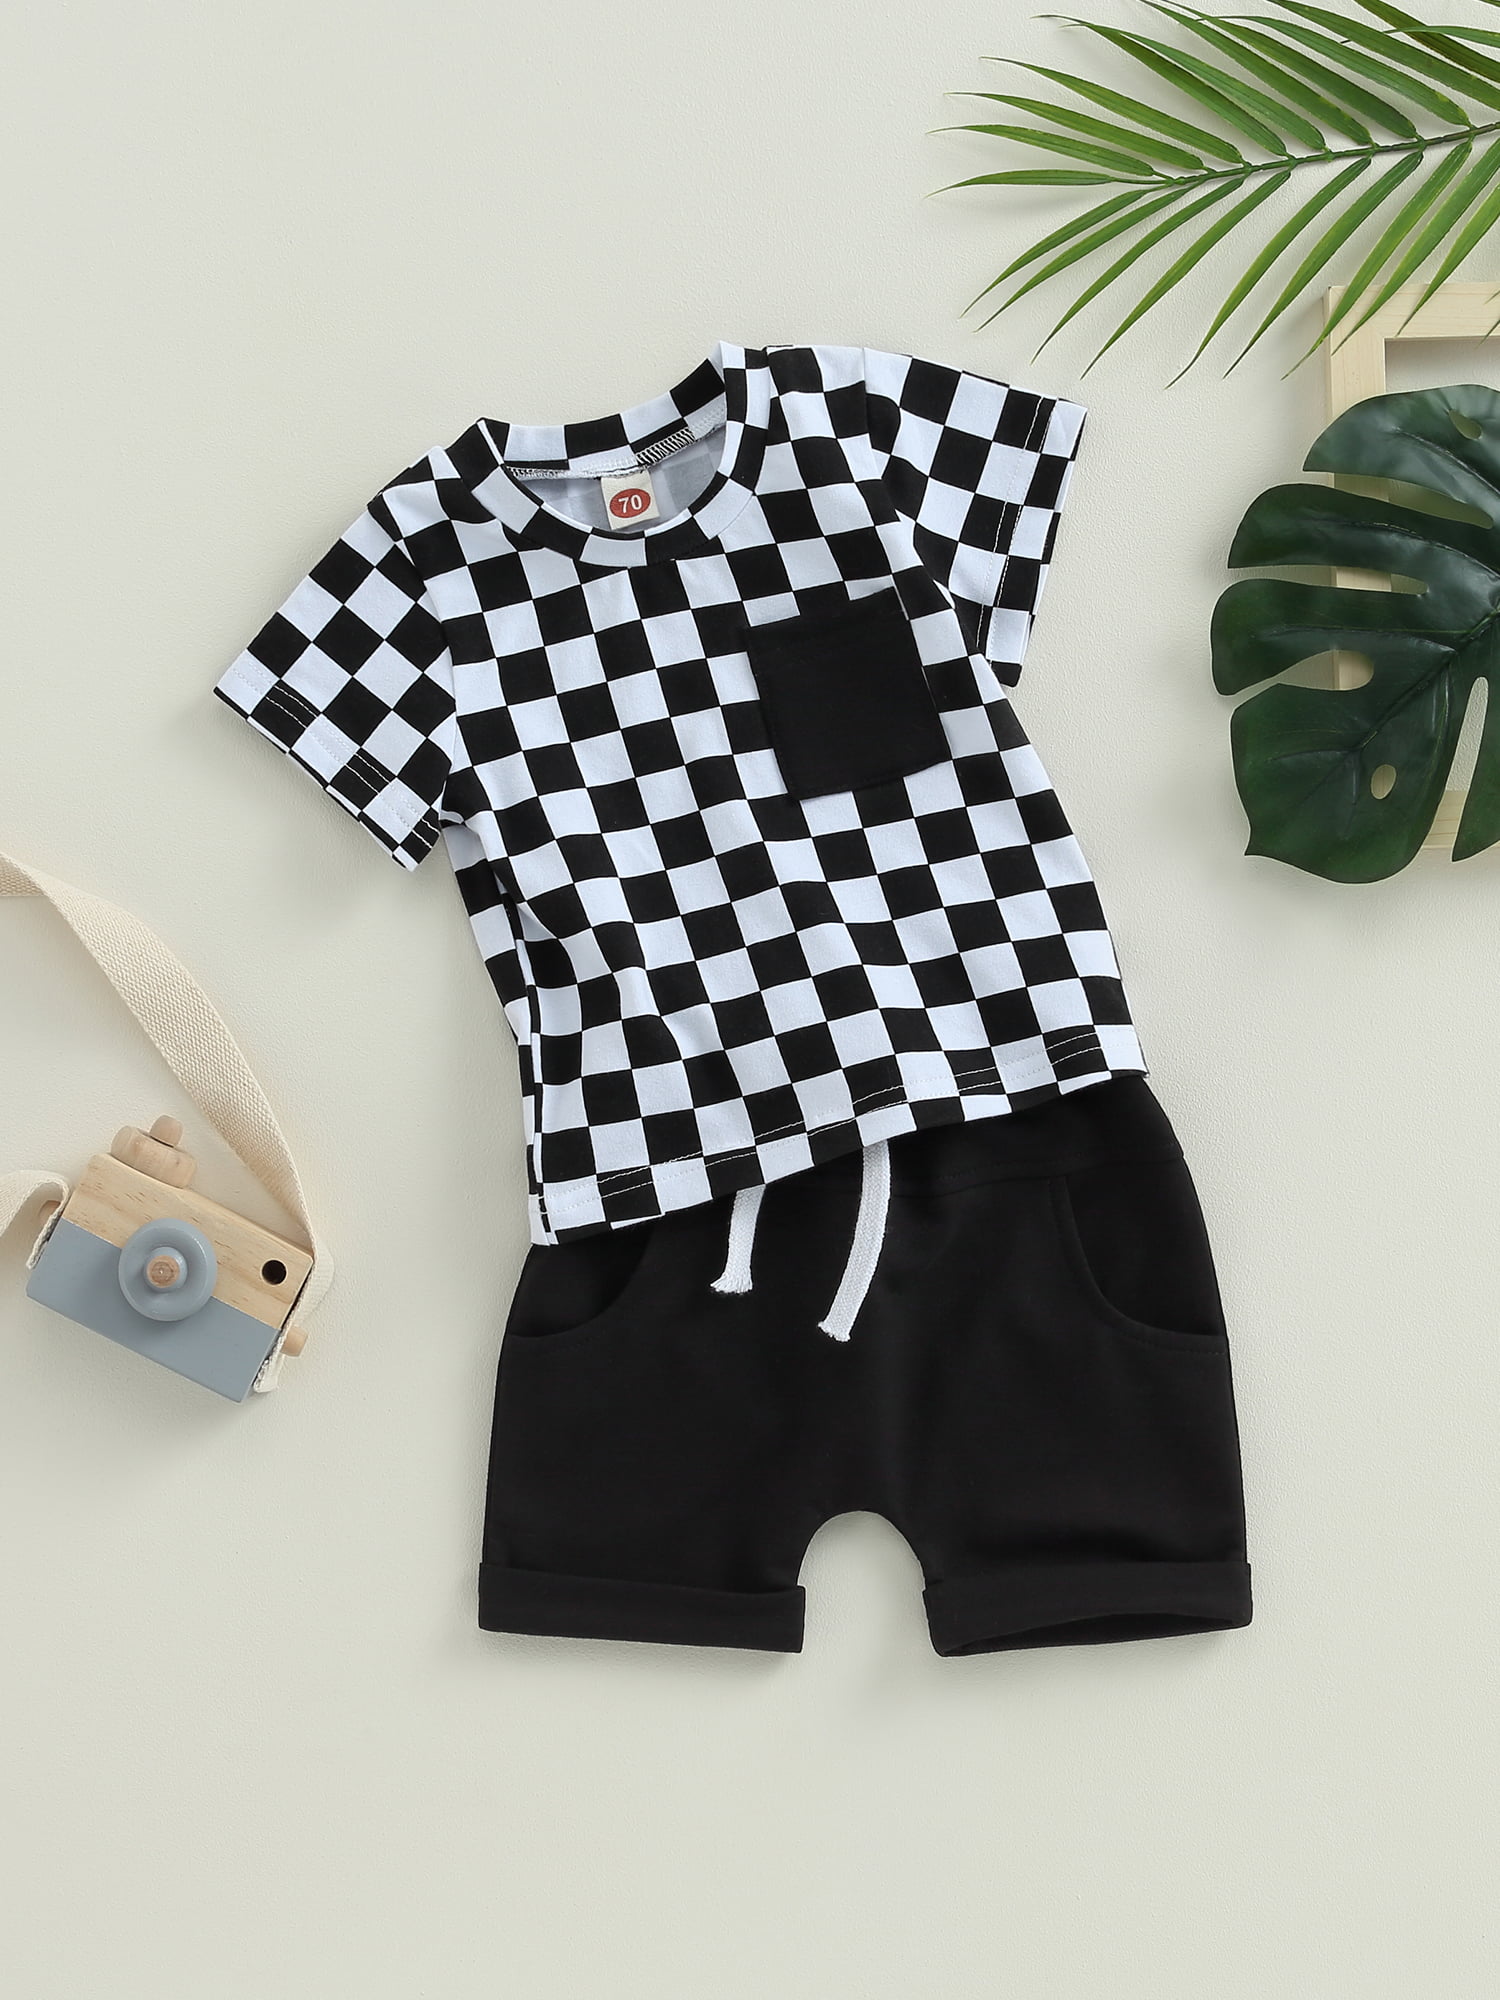 Toddler Baby Boys Checkerboard Plaid Print Short Sleeve Button Down Shirts  and Shorts Set Summer Outfits 0-24 Months 